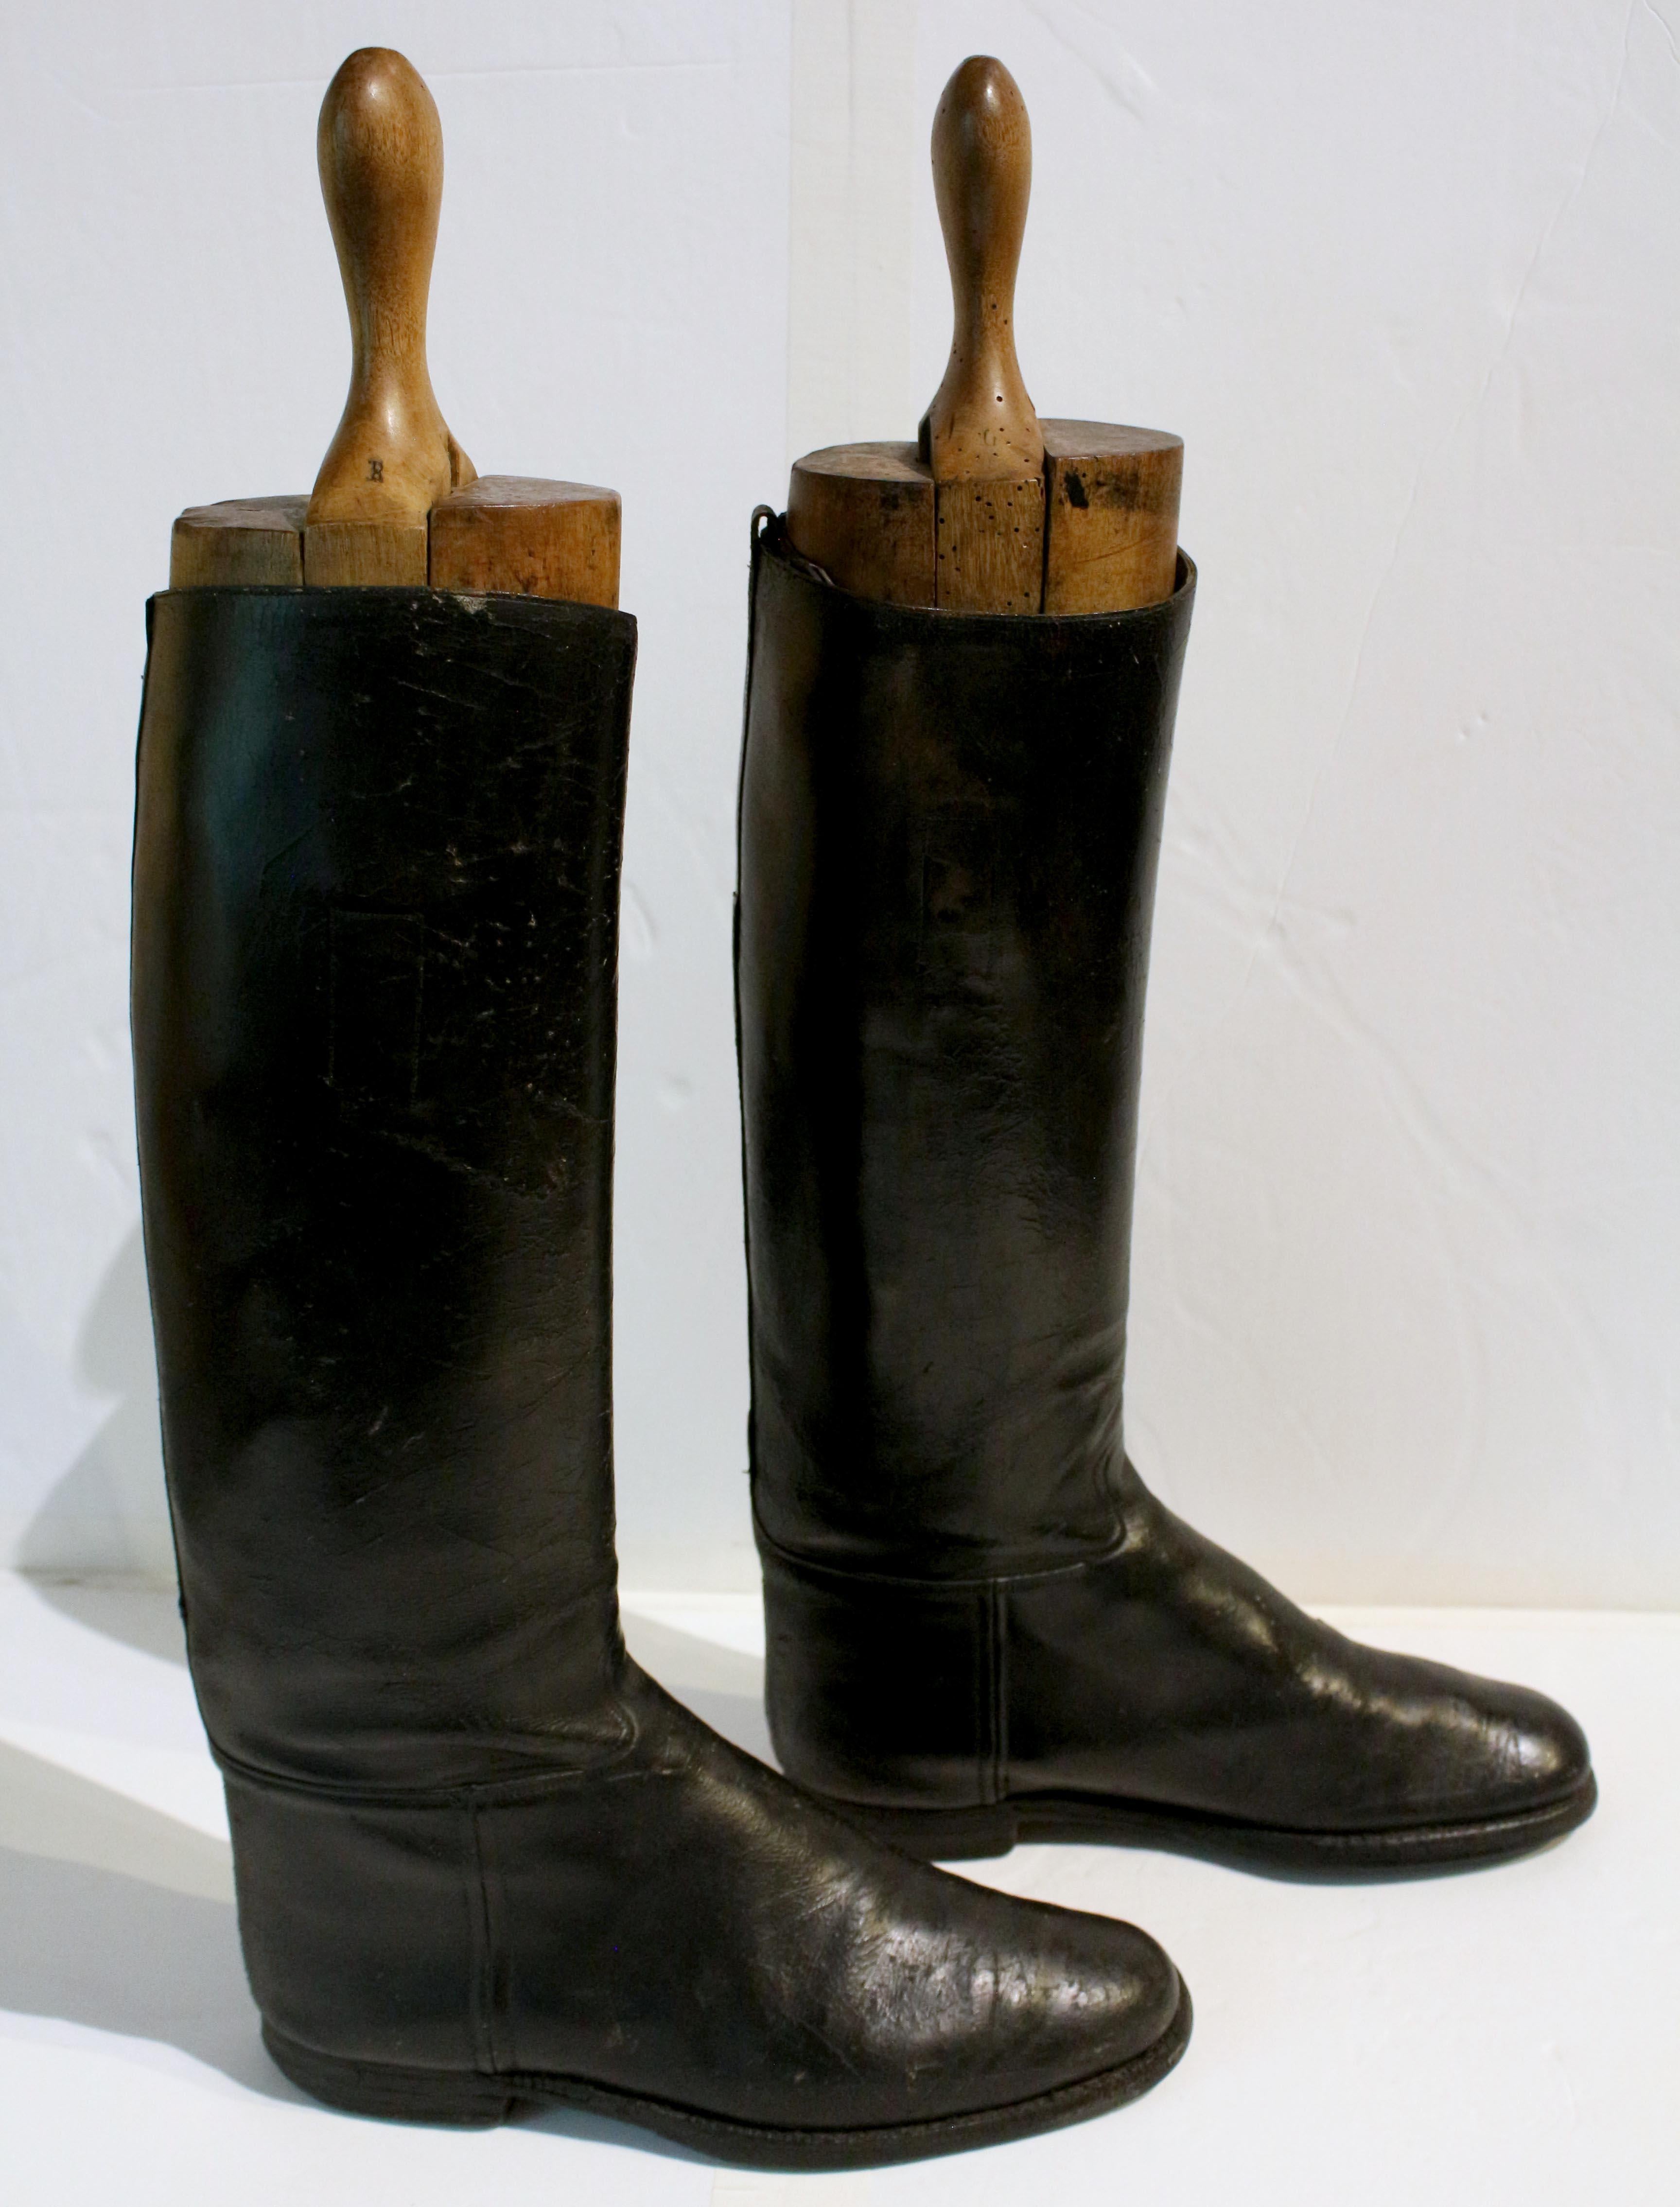 19th century riding boots